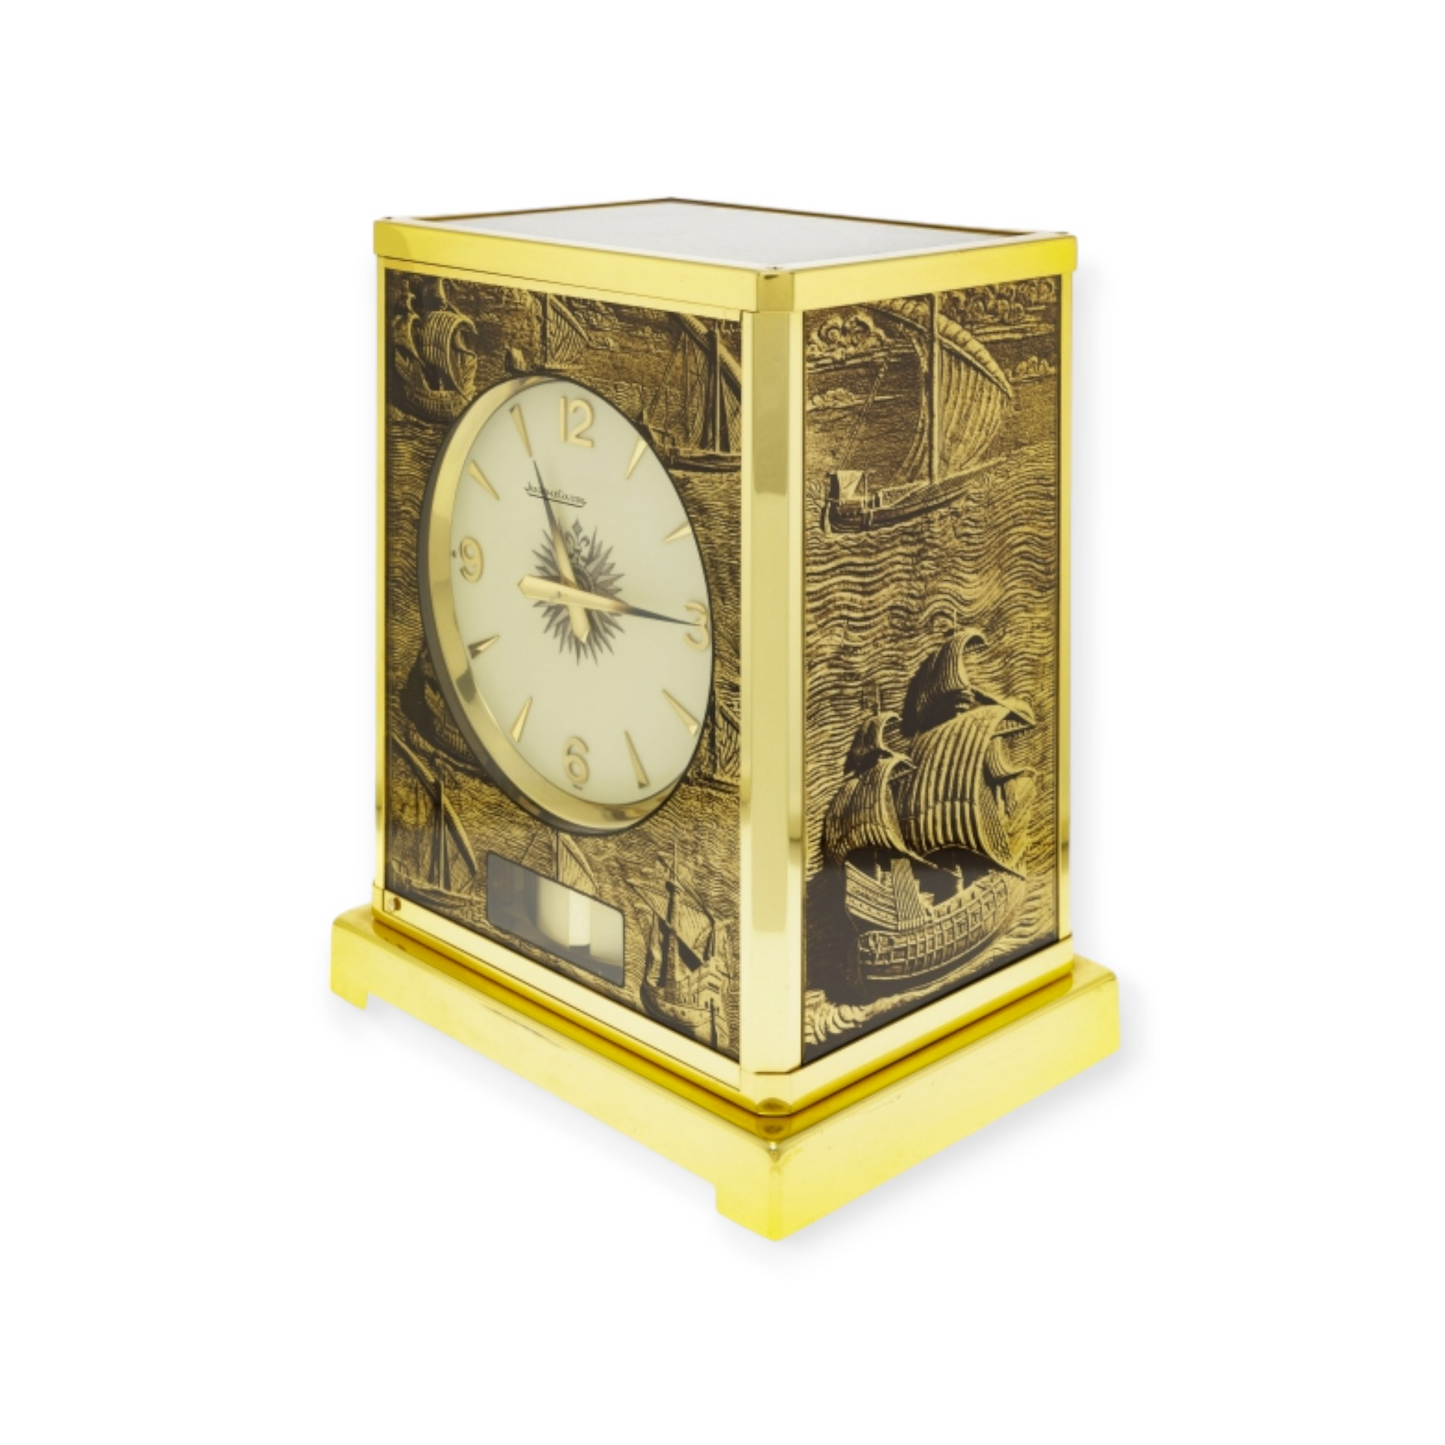 Jaeger-LeCoultre Atmos gilt metal cabinet clock with marine deco Rare model with ships